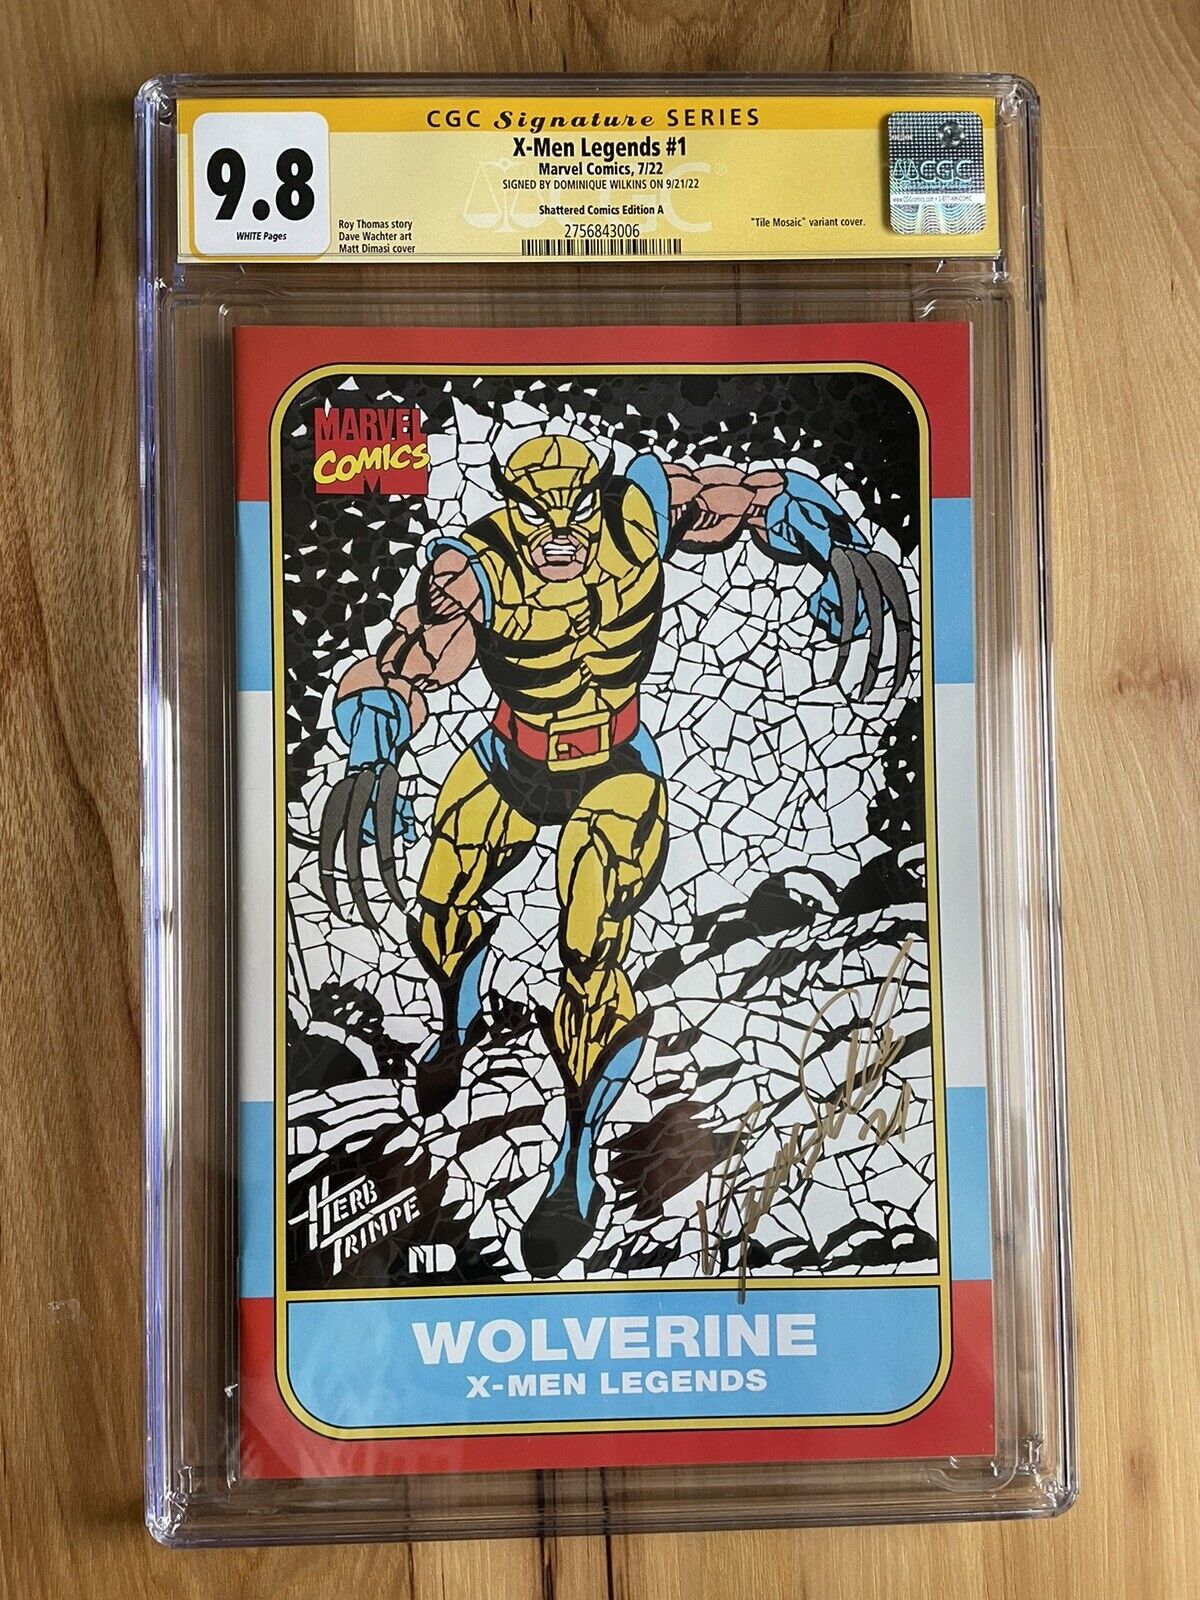 X-MEN #1 Wolverine Rookie Card comic Cgc 9.8 Signed by Dominique Wilkins NBA